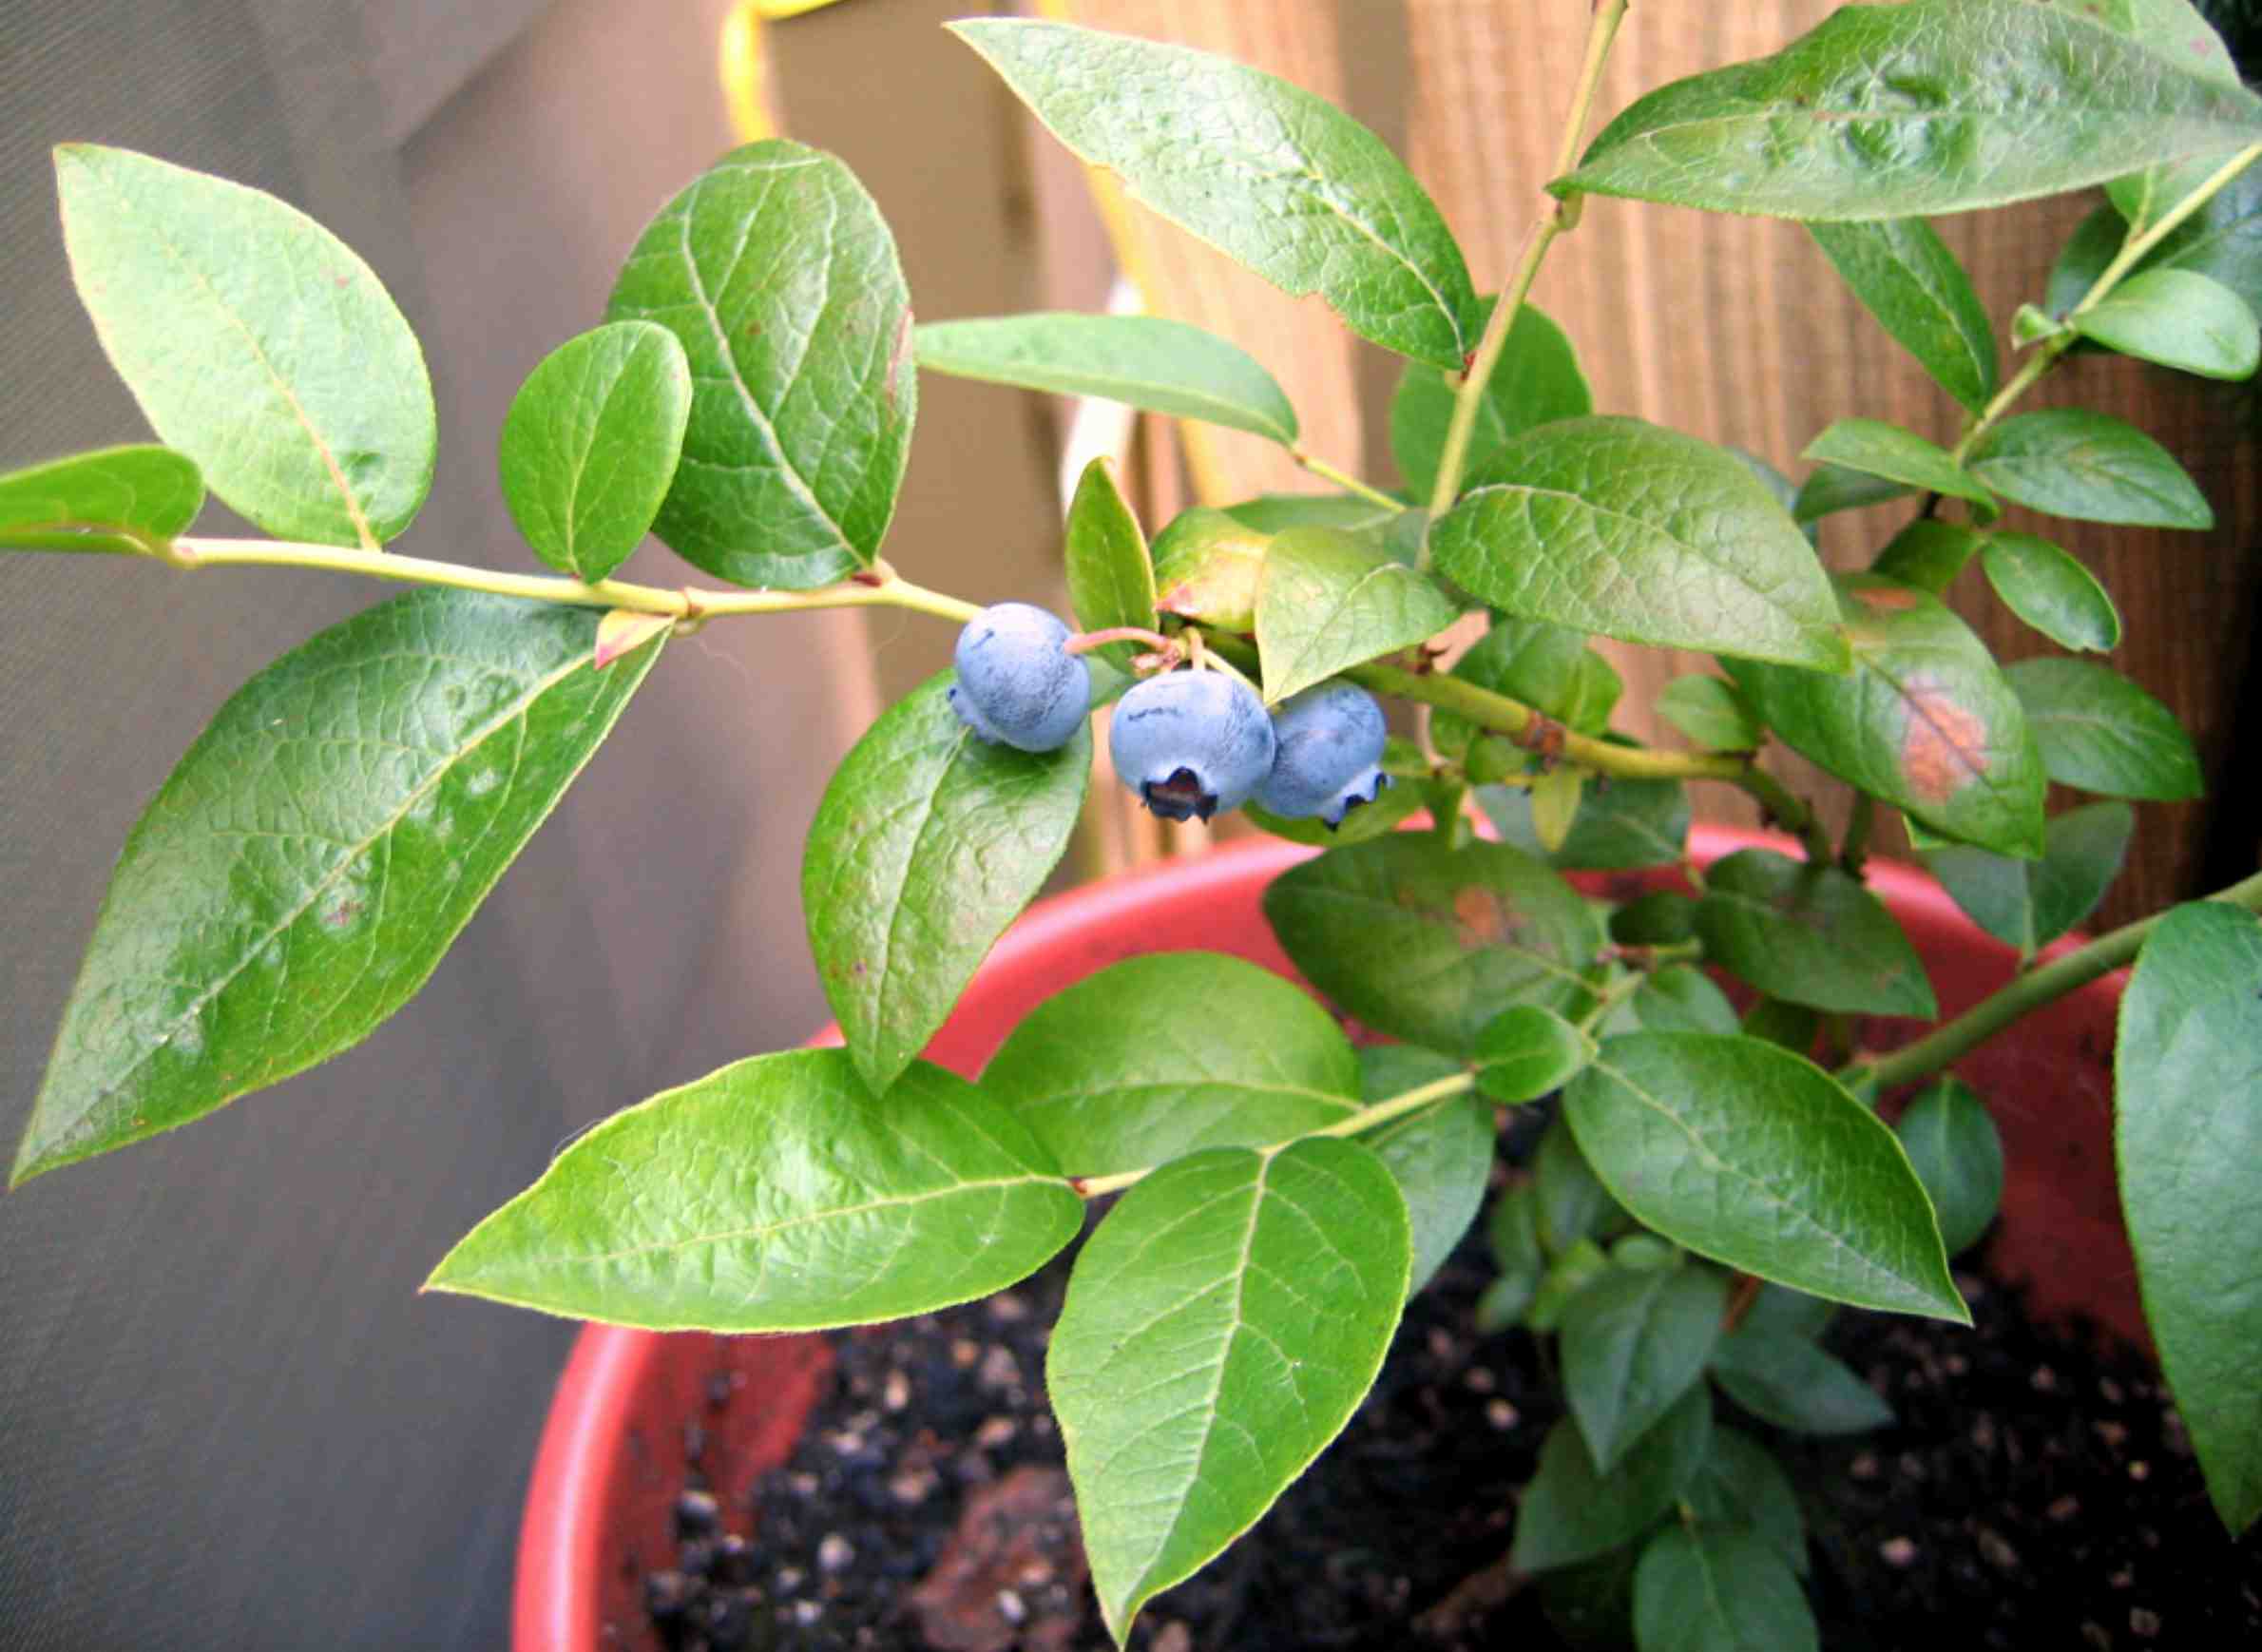 Blueberries growing in a planter